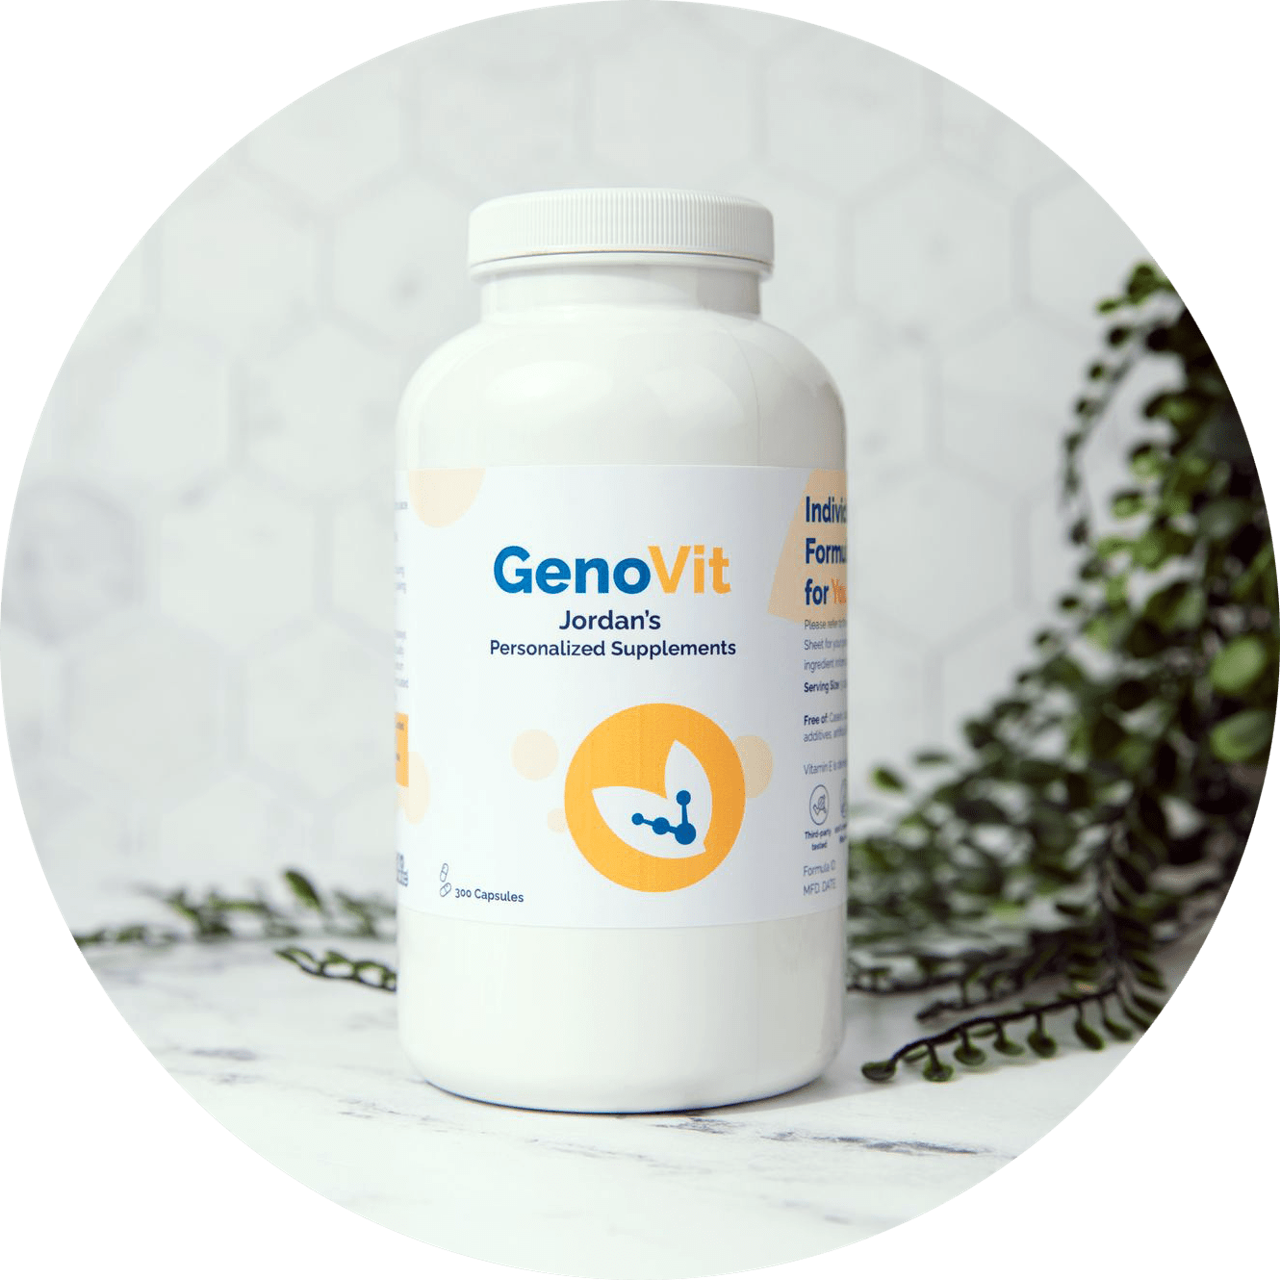 GenoVit - Personalized Supplements and Vitamins based on your genetic DNA makeup